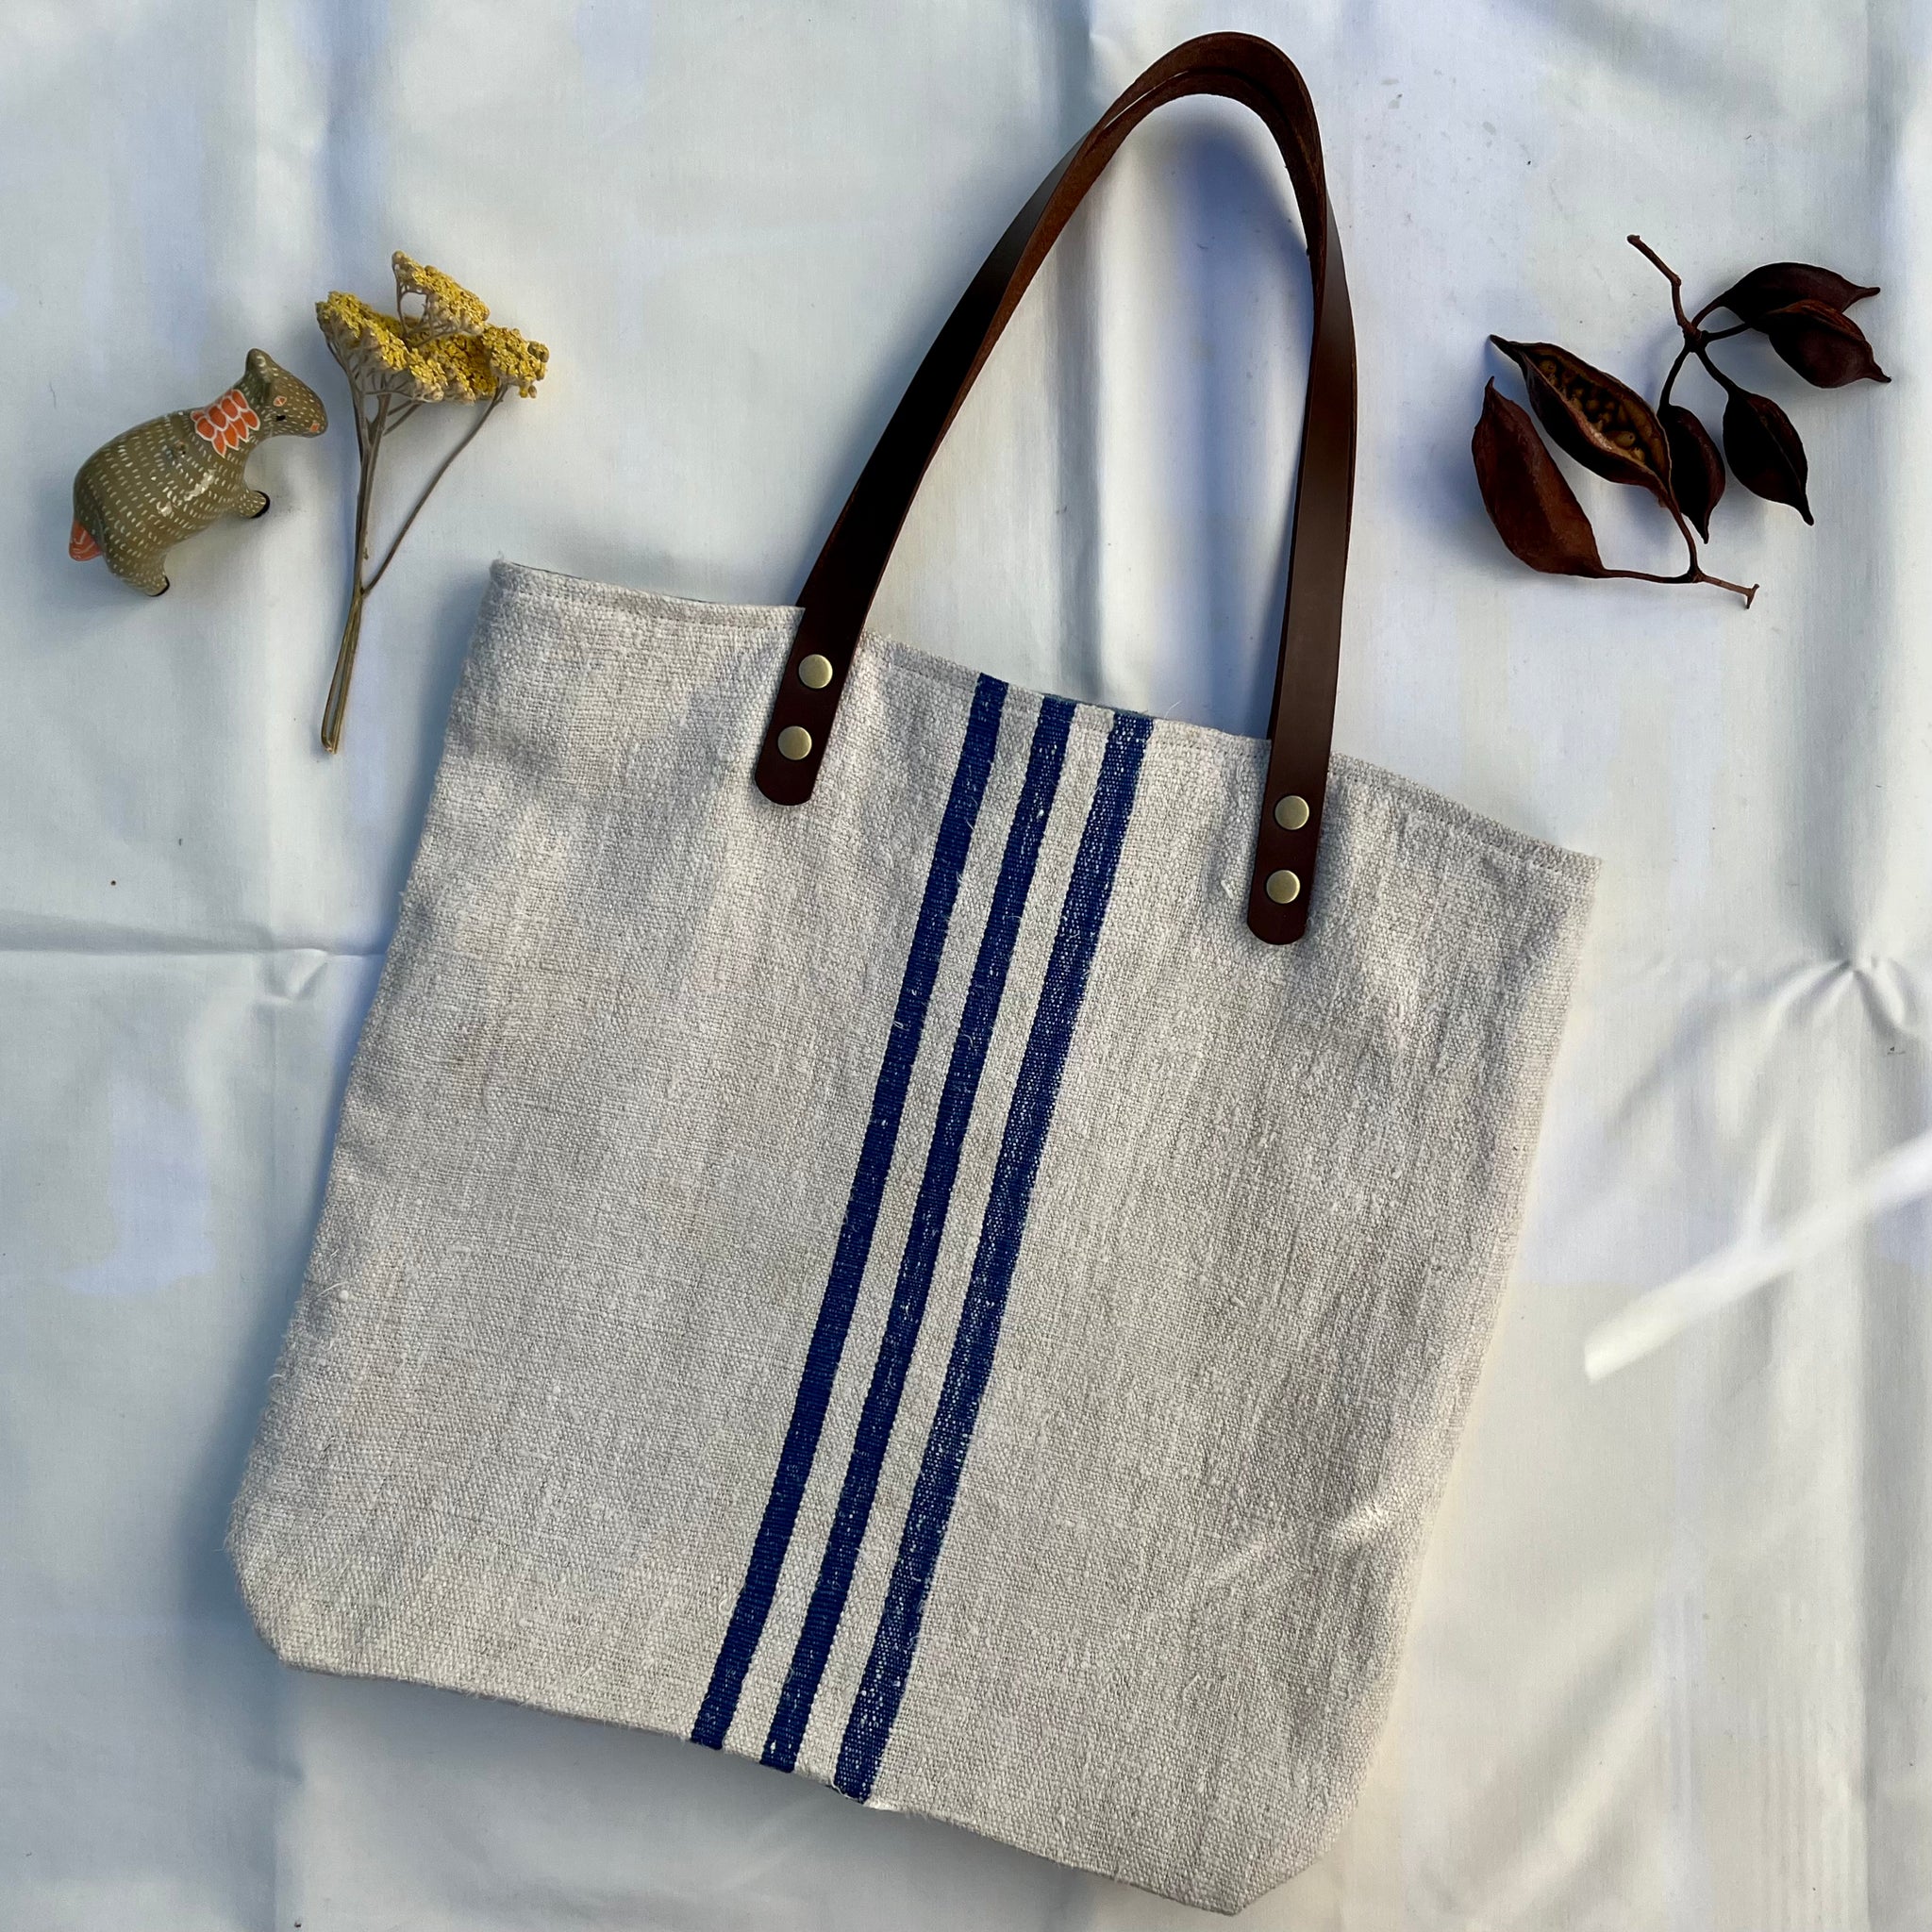 Vintage grain sack tote bag. Vertical blue and red stripes. Handwoven –  Bits and Totes